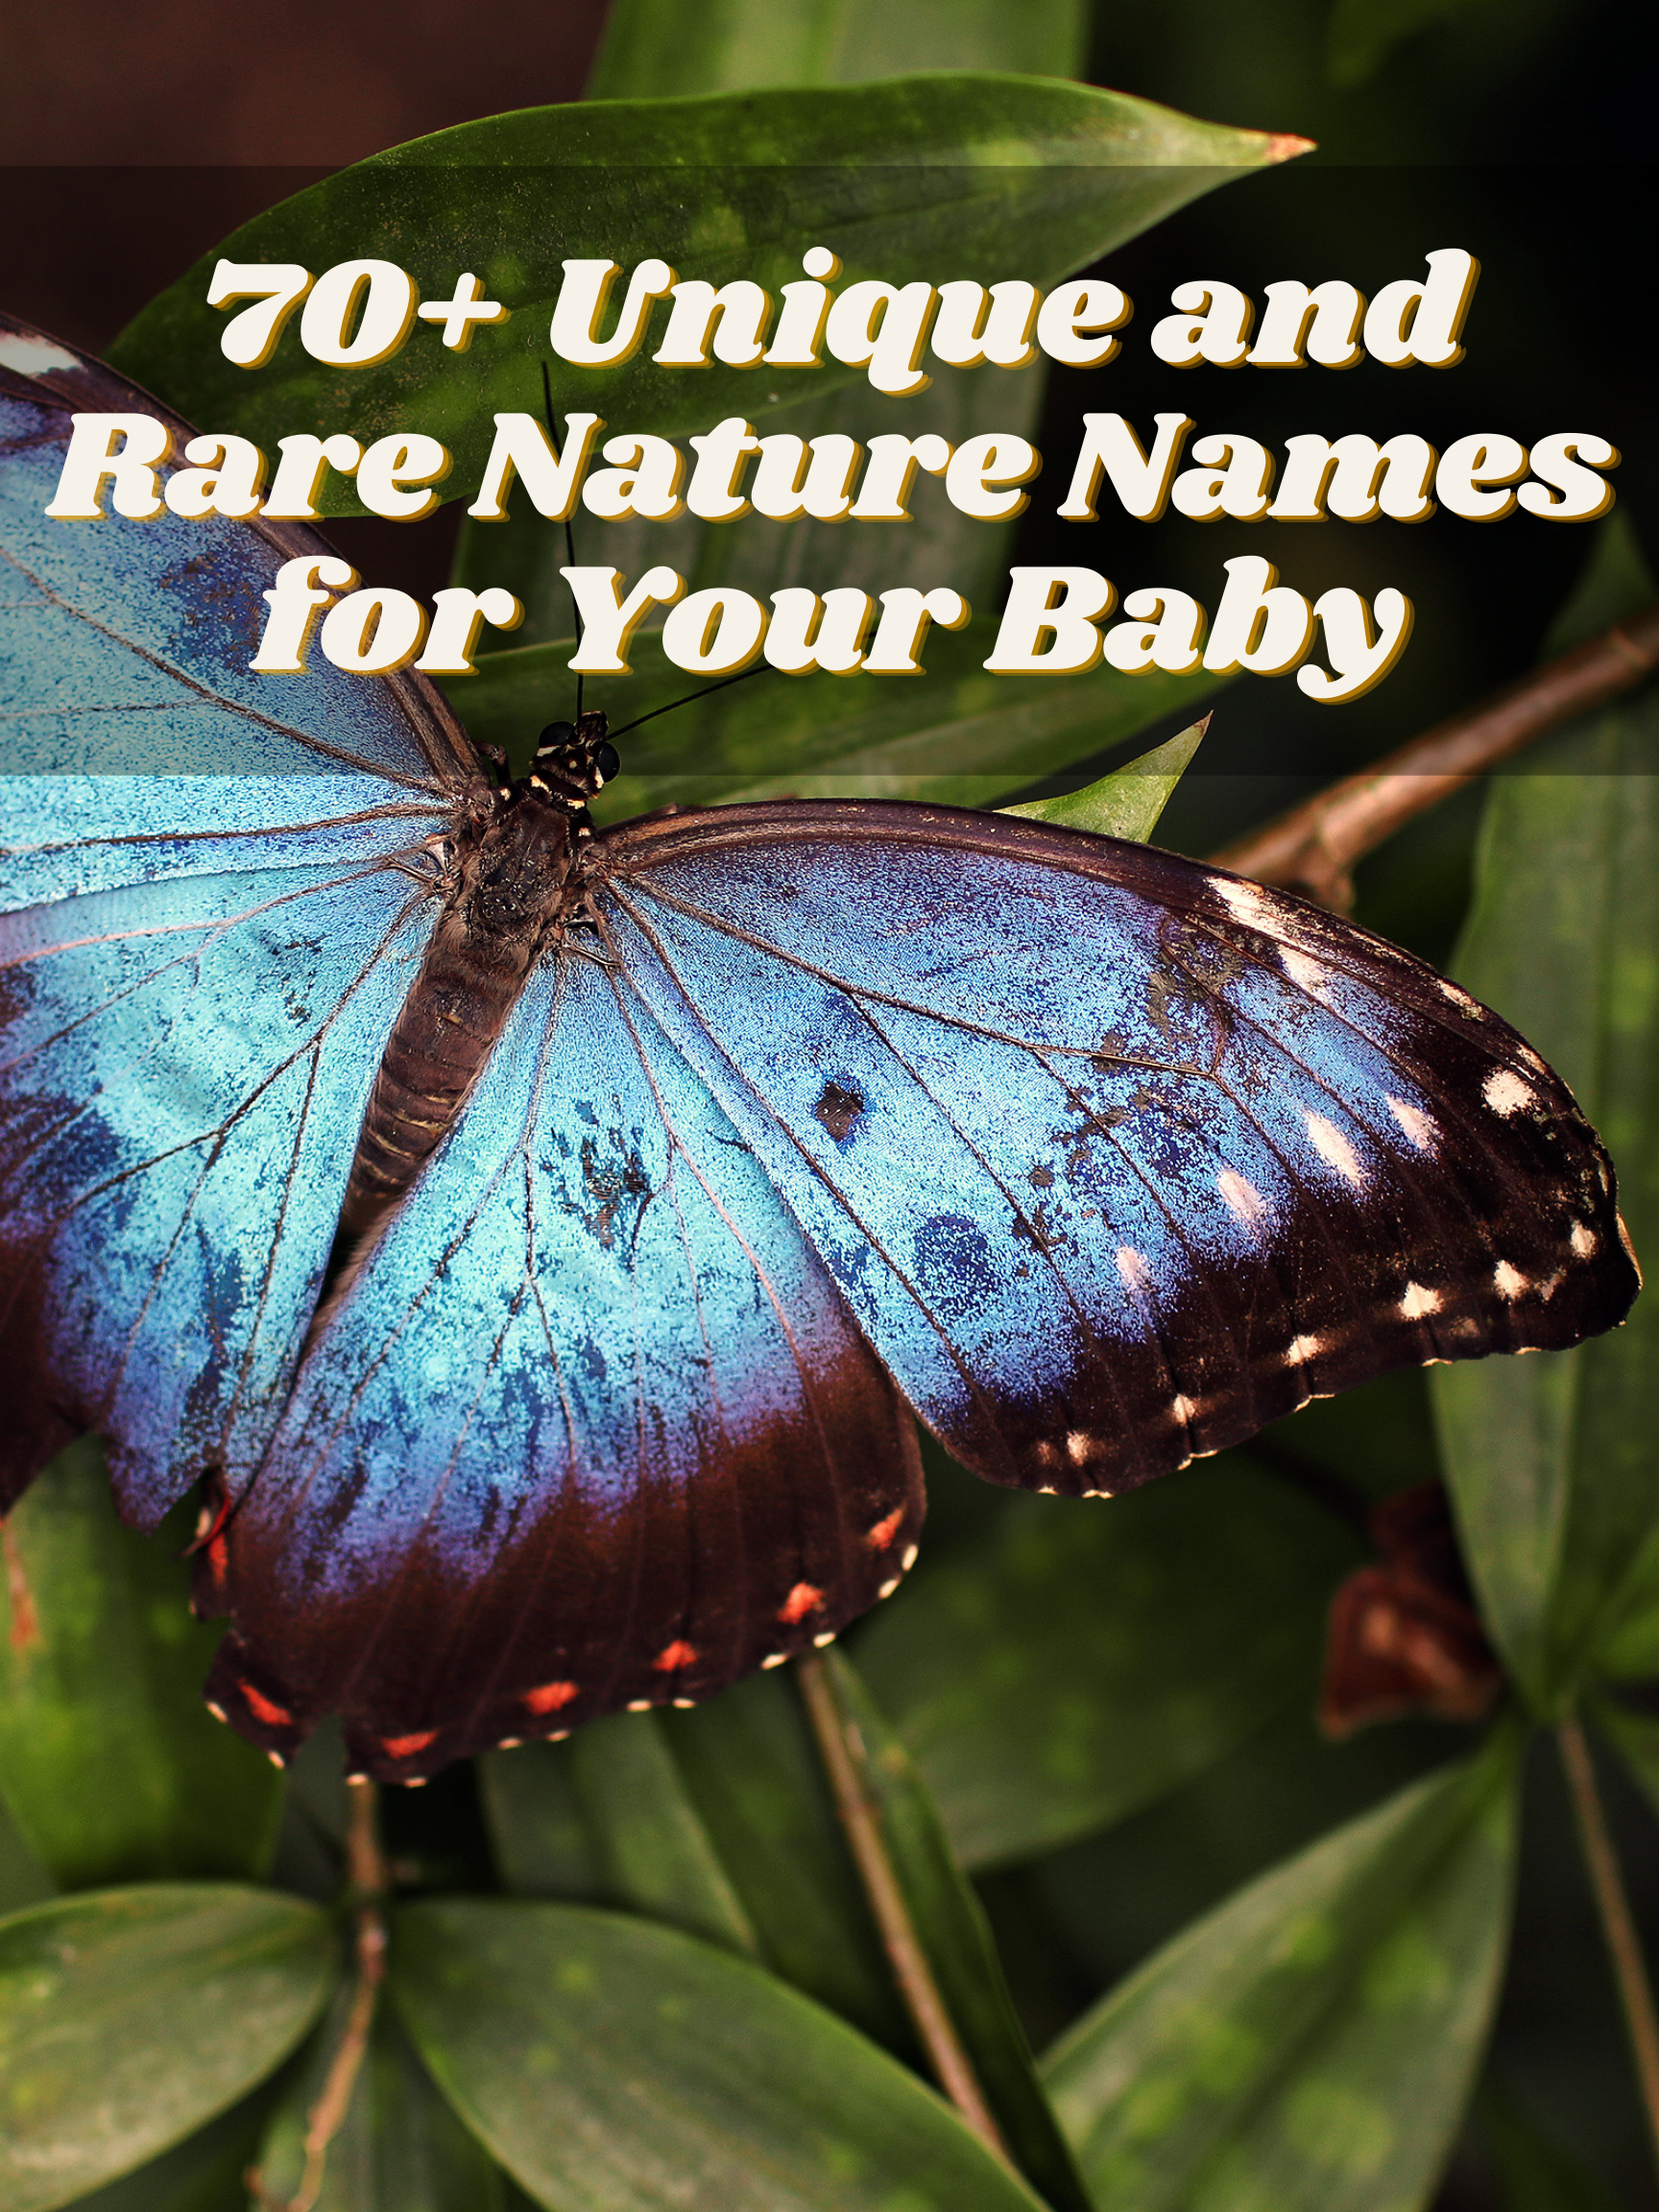 70+ Unique and Rare Nature Names for Your Baby